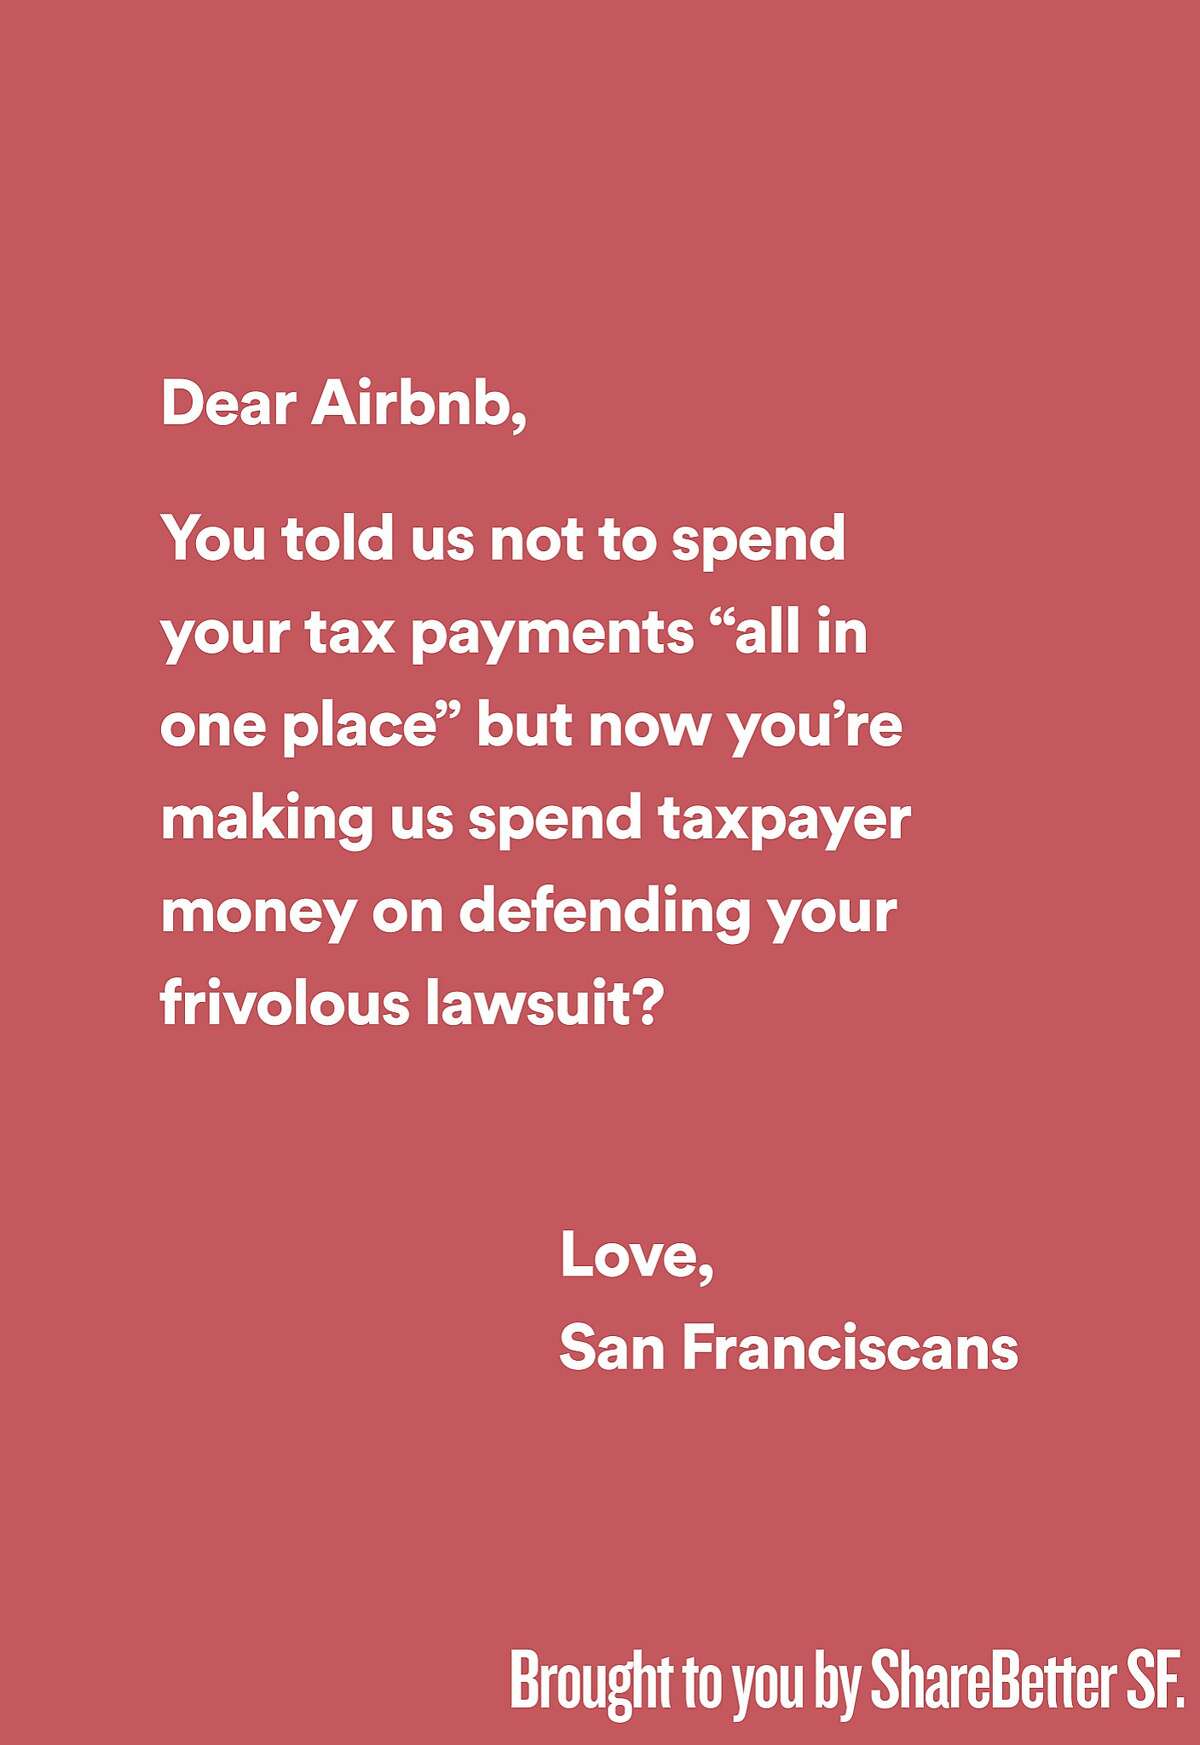 A new ad campaign by Share Better, an advocacy group, takes Airbnb to task for fighting San Francisco's short-term rental laws.